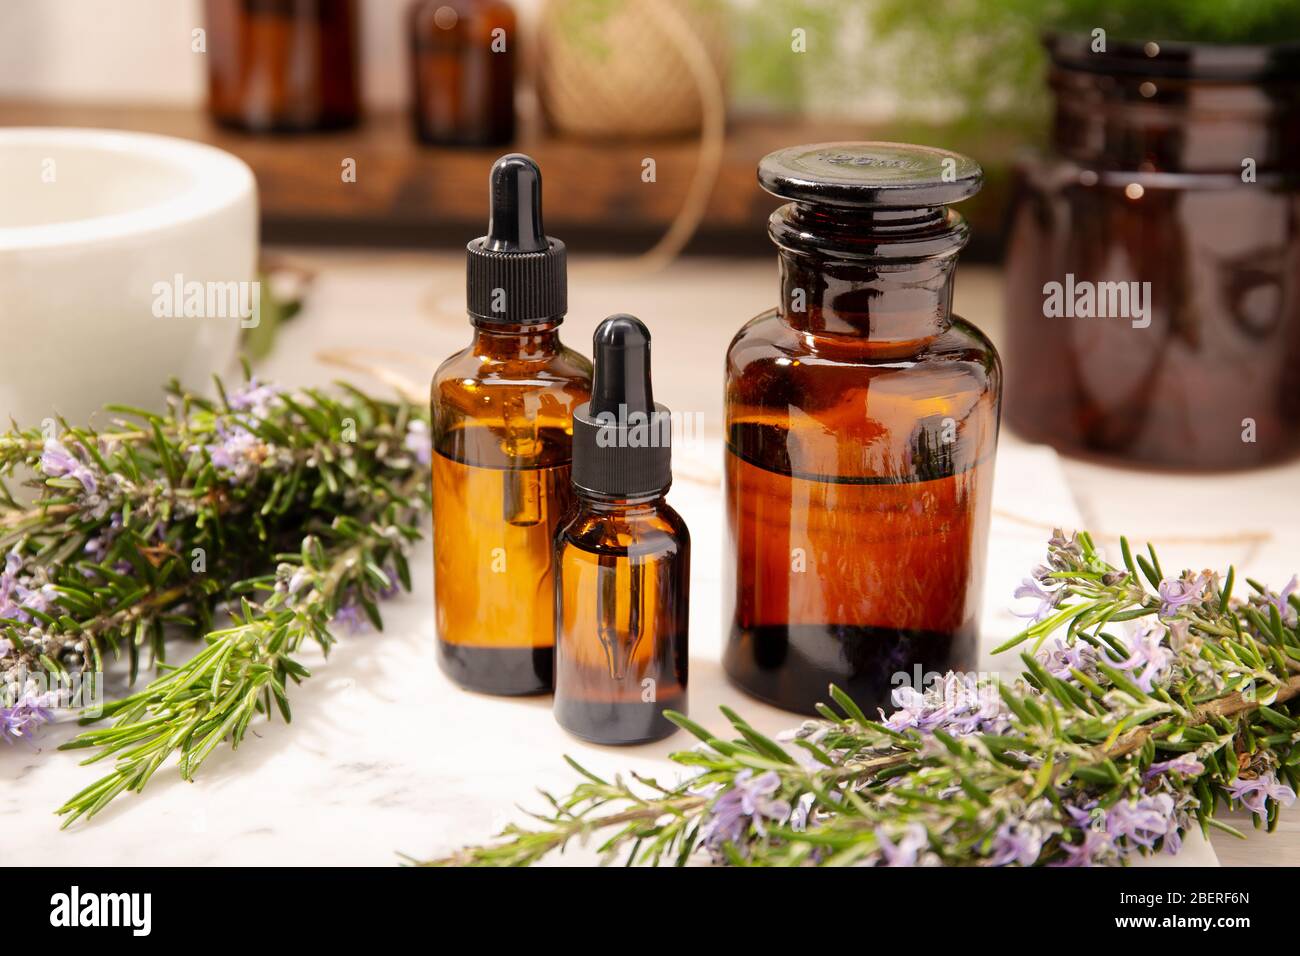 Rosemary essential oil on vintage apothecary bottles. Herbal oil for skin care, aromatherapy and natural medicine Stock Photo